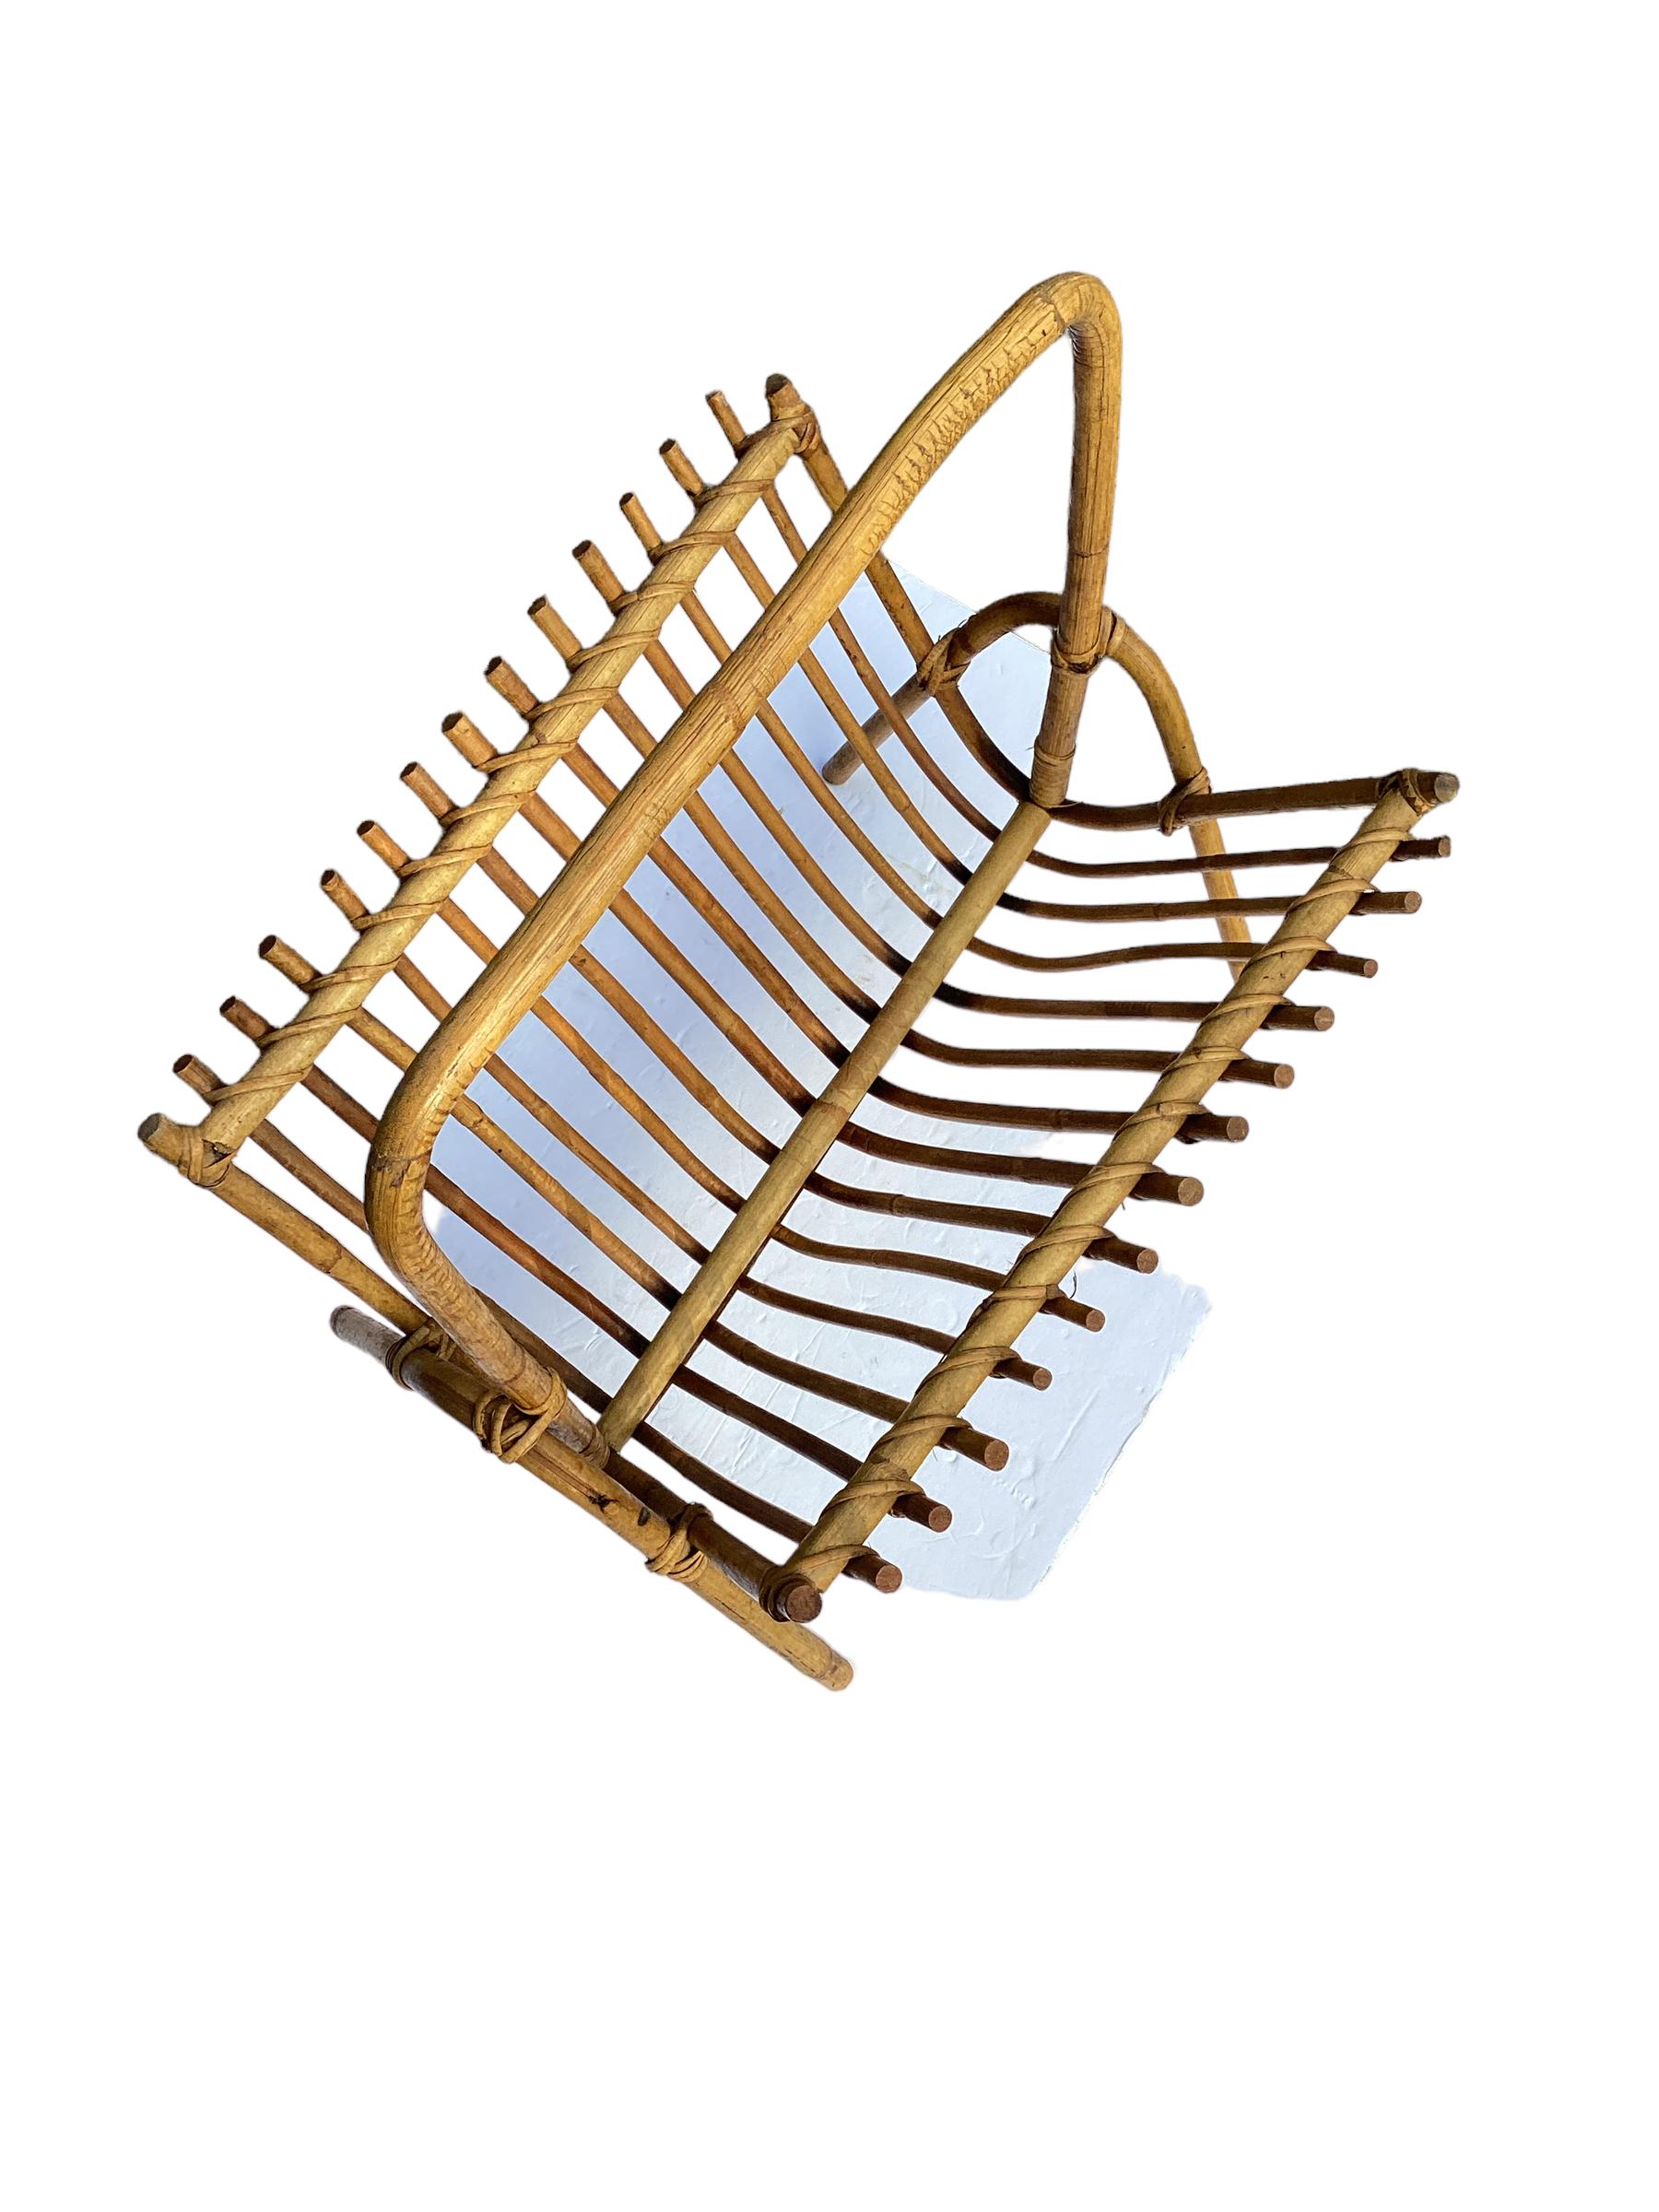 Vintage Rattan Magazine Rack in the style of Franco Albini. Versatile and useful item that can also be used for holding records. In very good vintage condition with no obvious signs of damage.